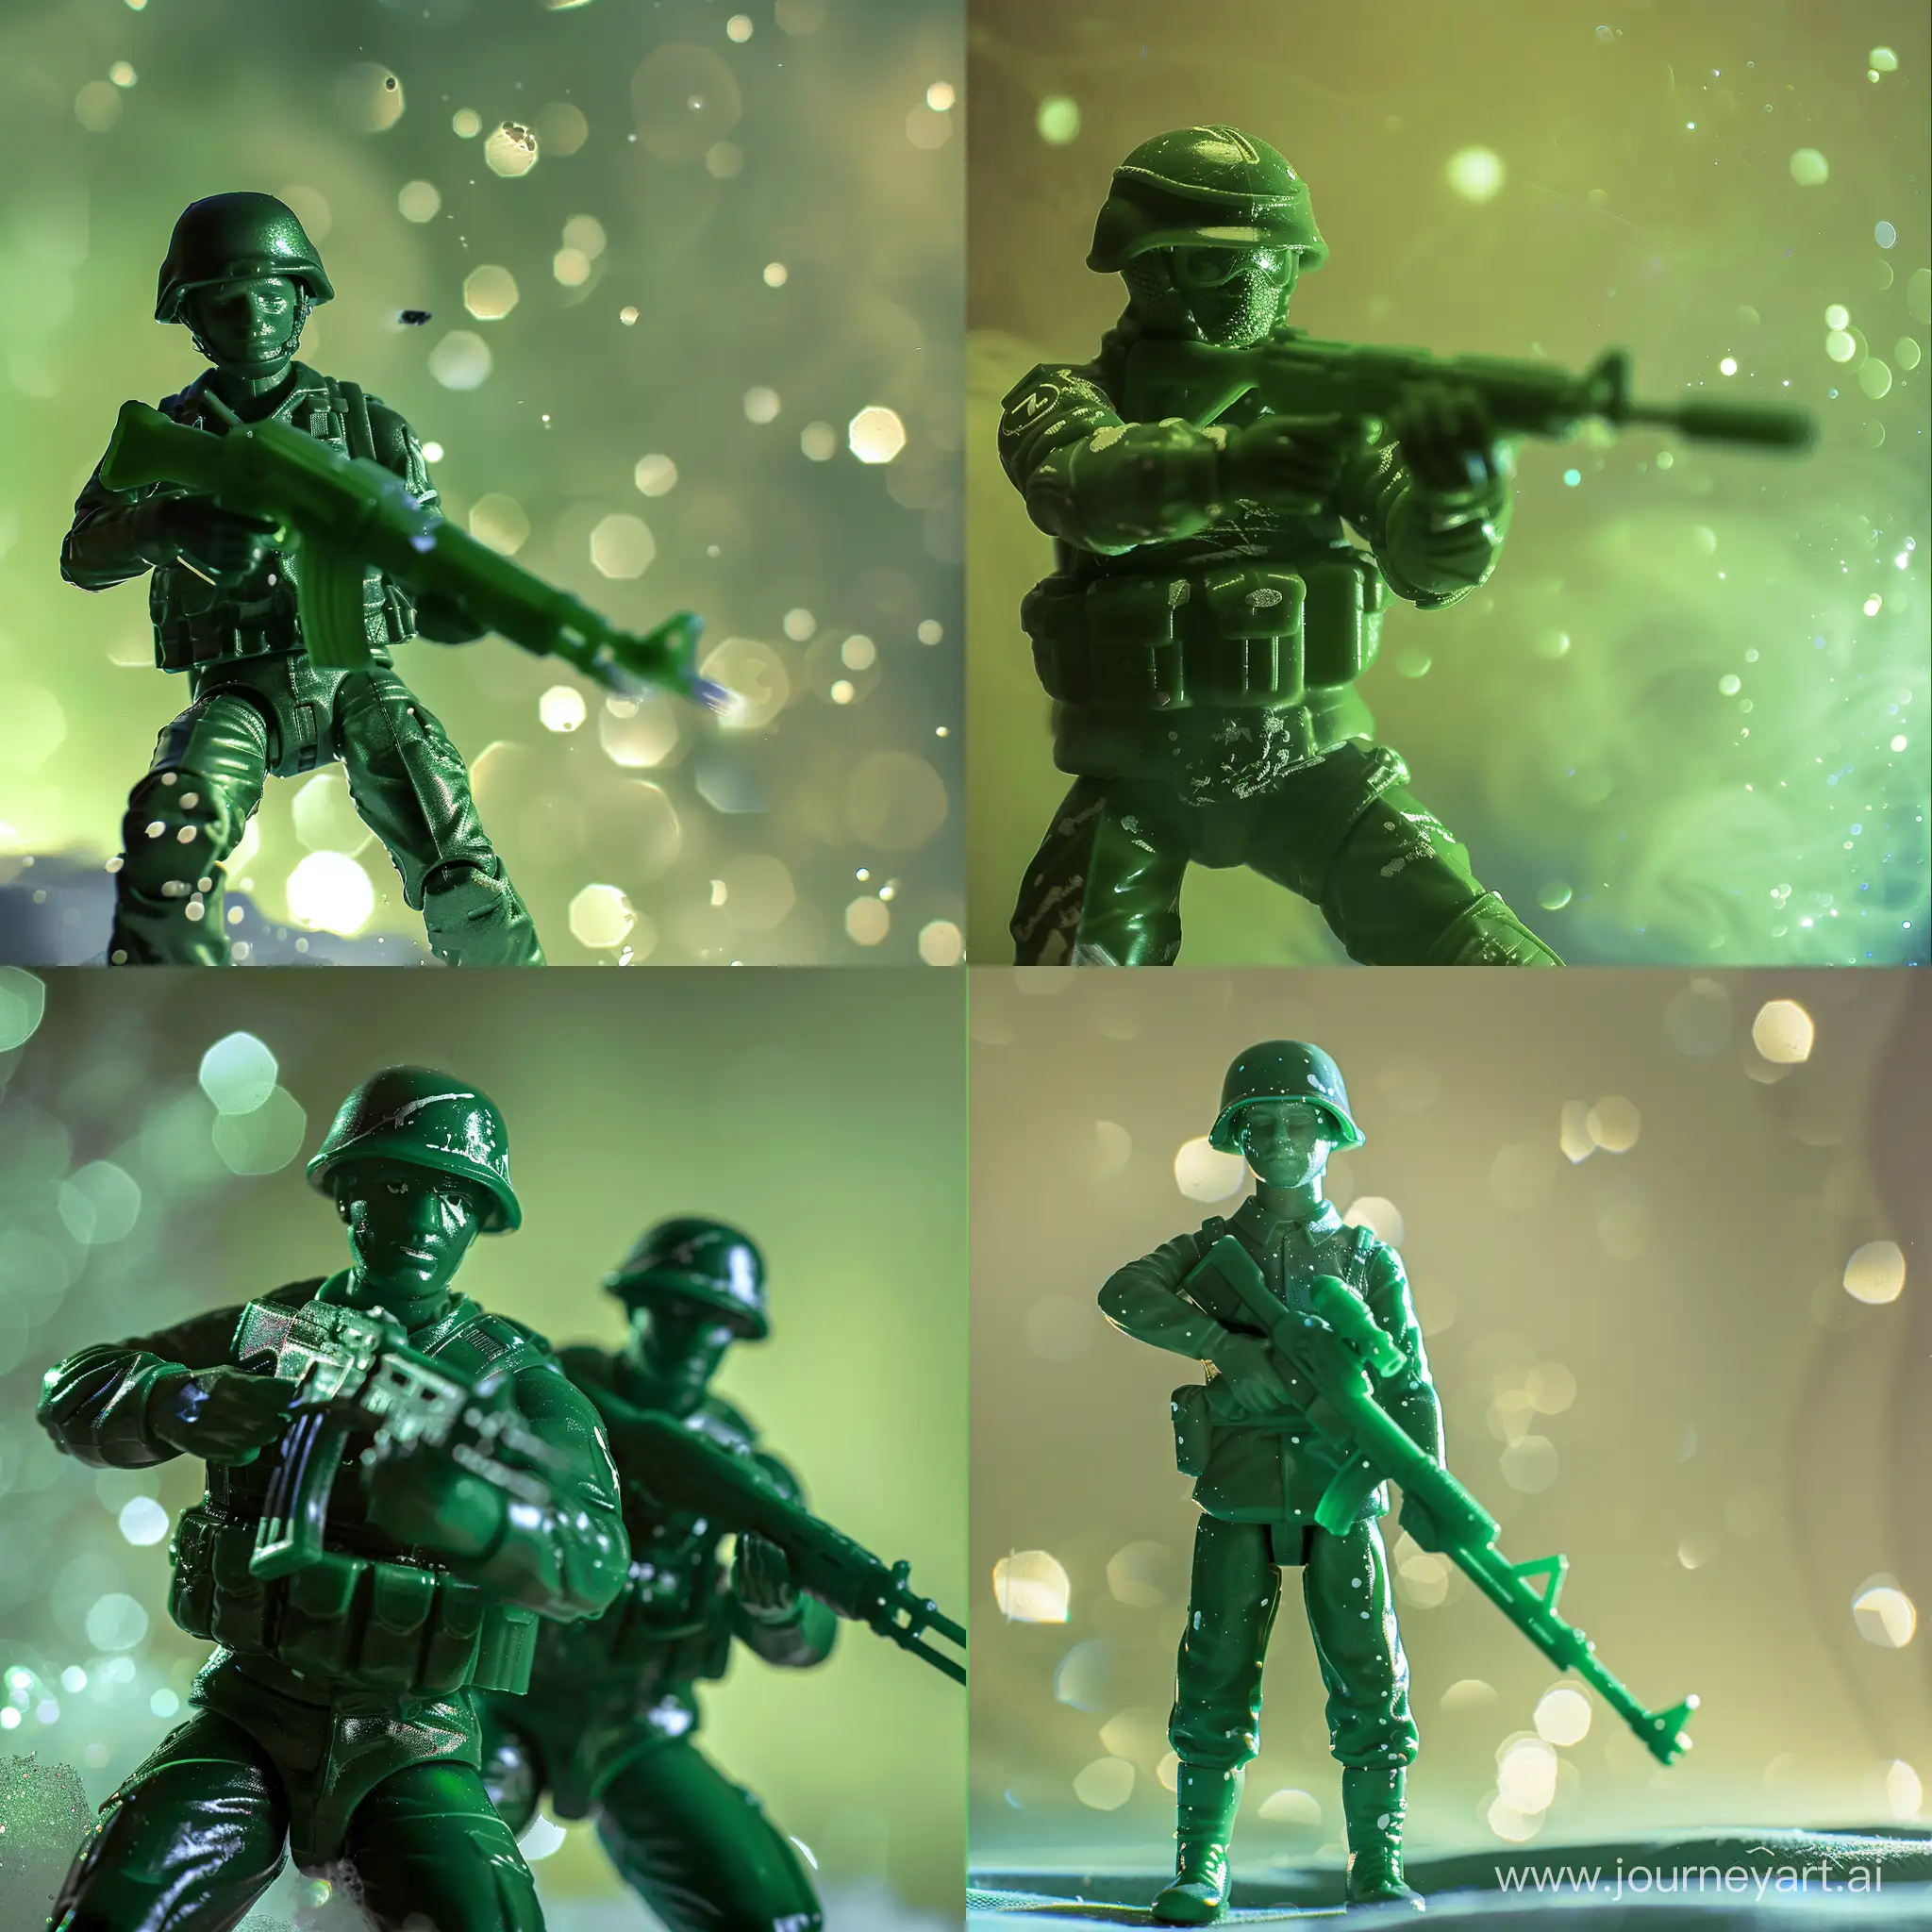 green plastic soldiers toys, with weapon, green background, light spots, detalised